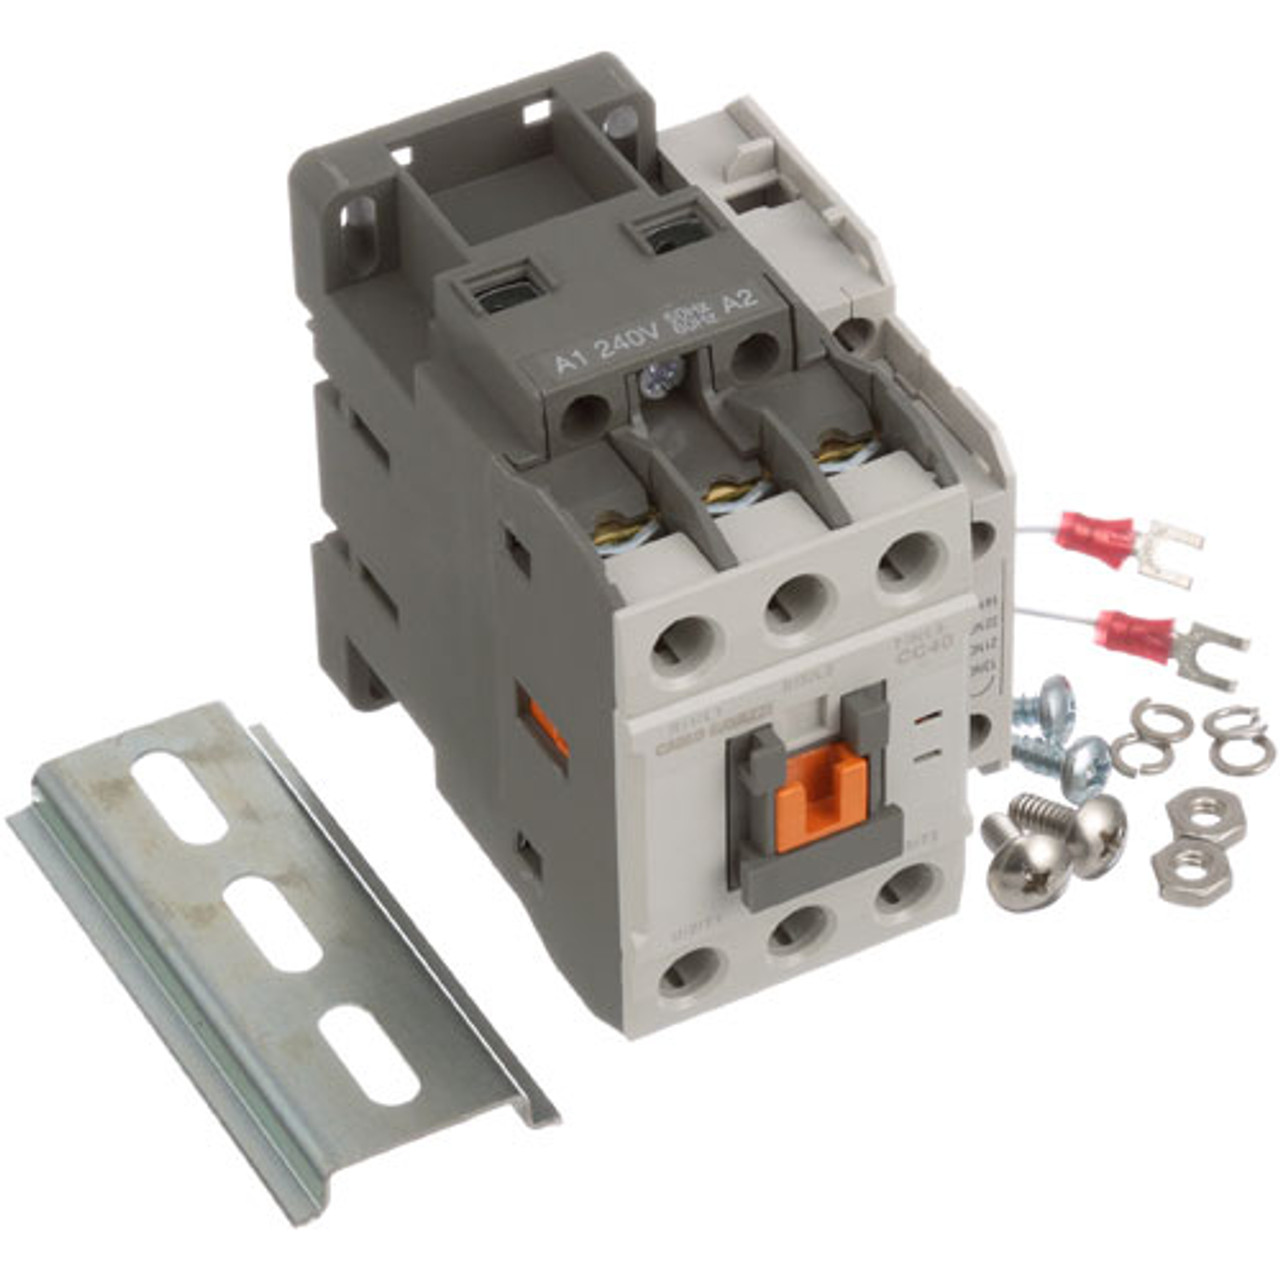 Contactor - Replacement Part For Blodgett 38559